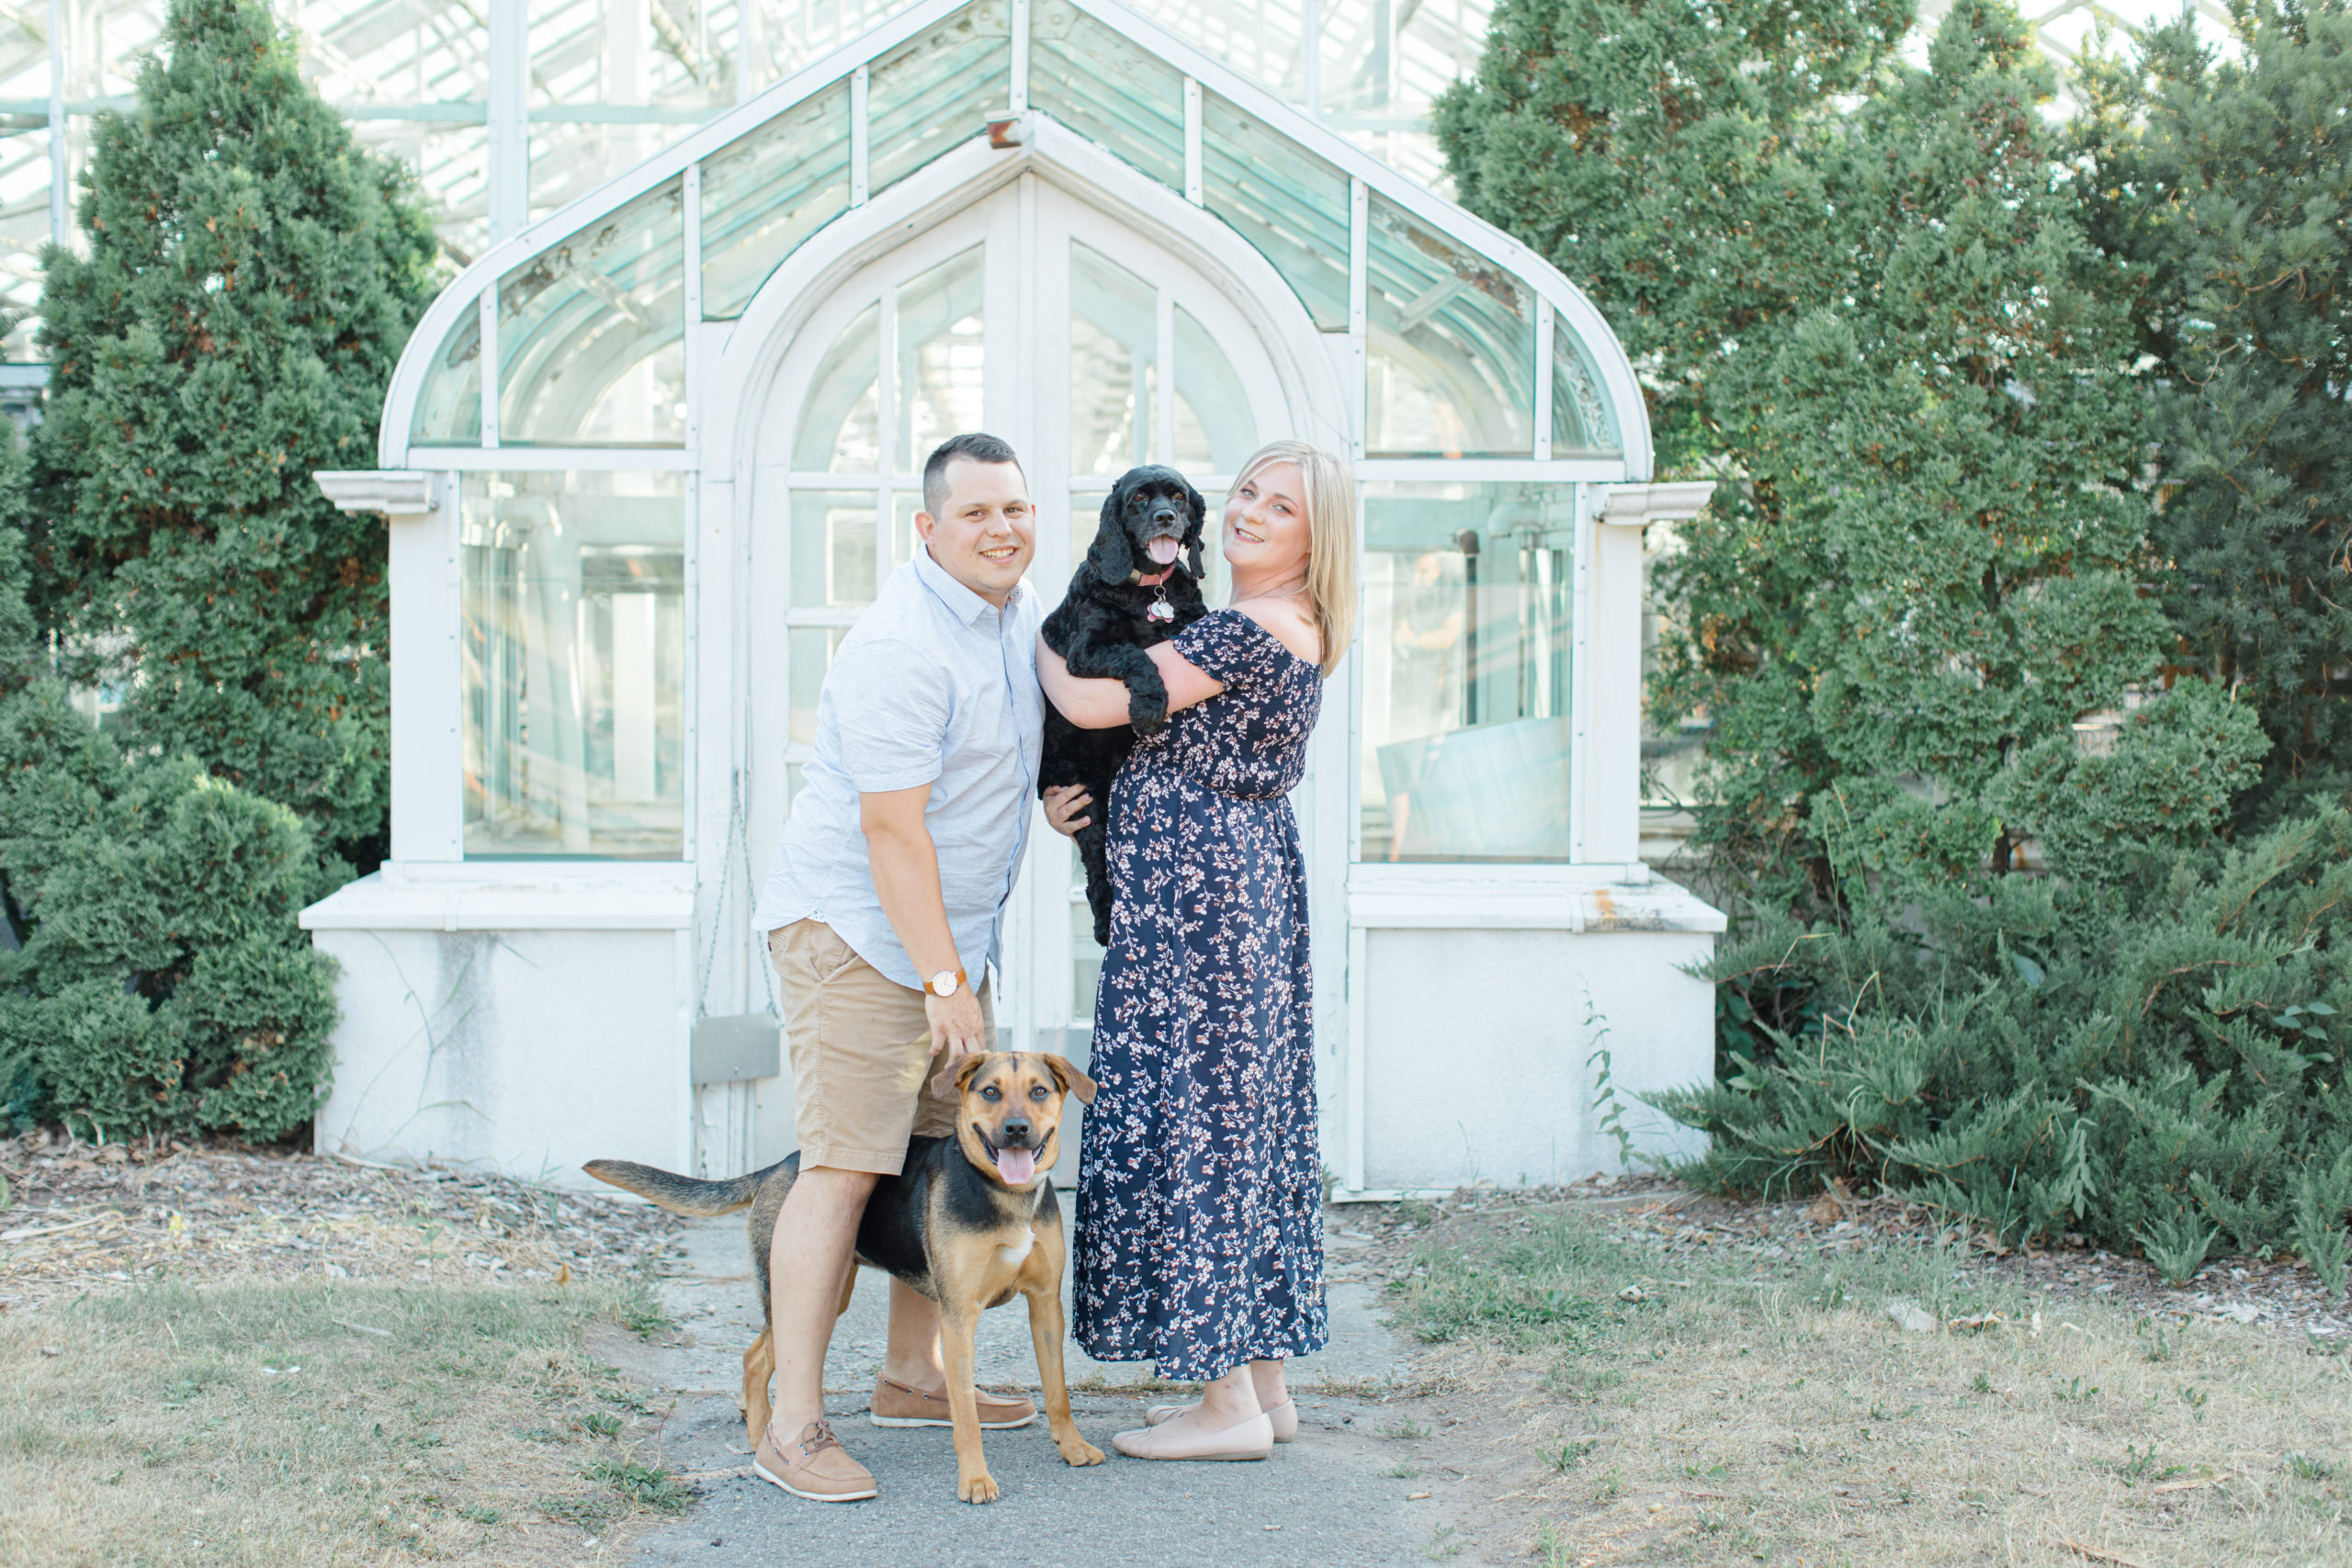 Arboretum Engagement Photography Session with Dogs